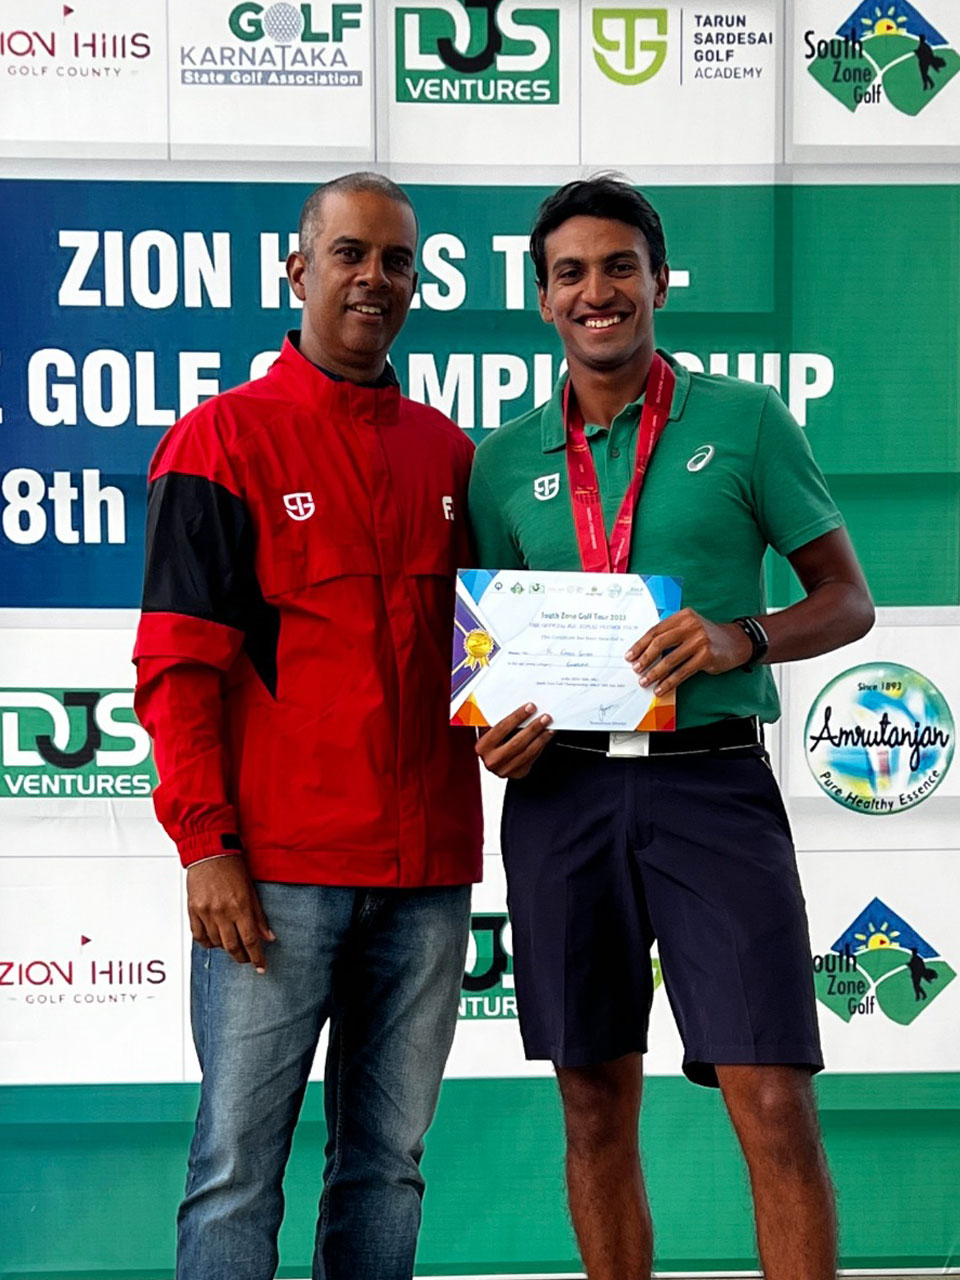 Rahul Batra finished 3rd in TSG South Zone Amateur Championship